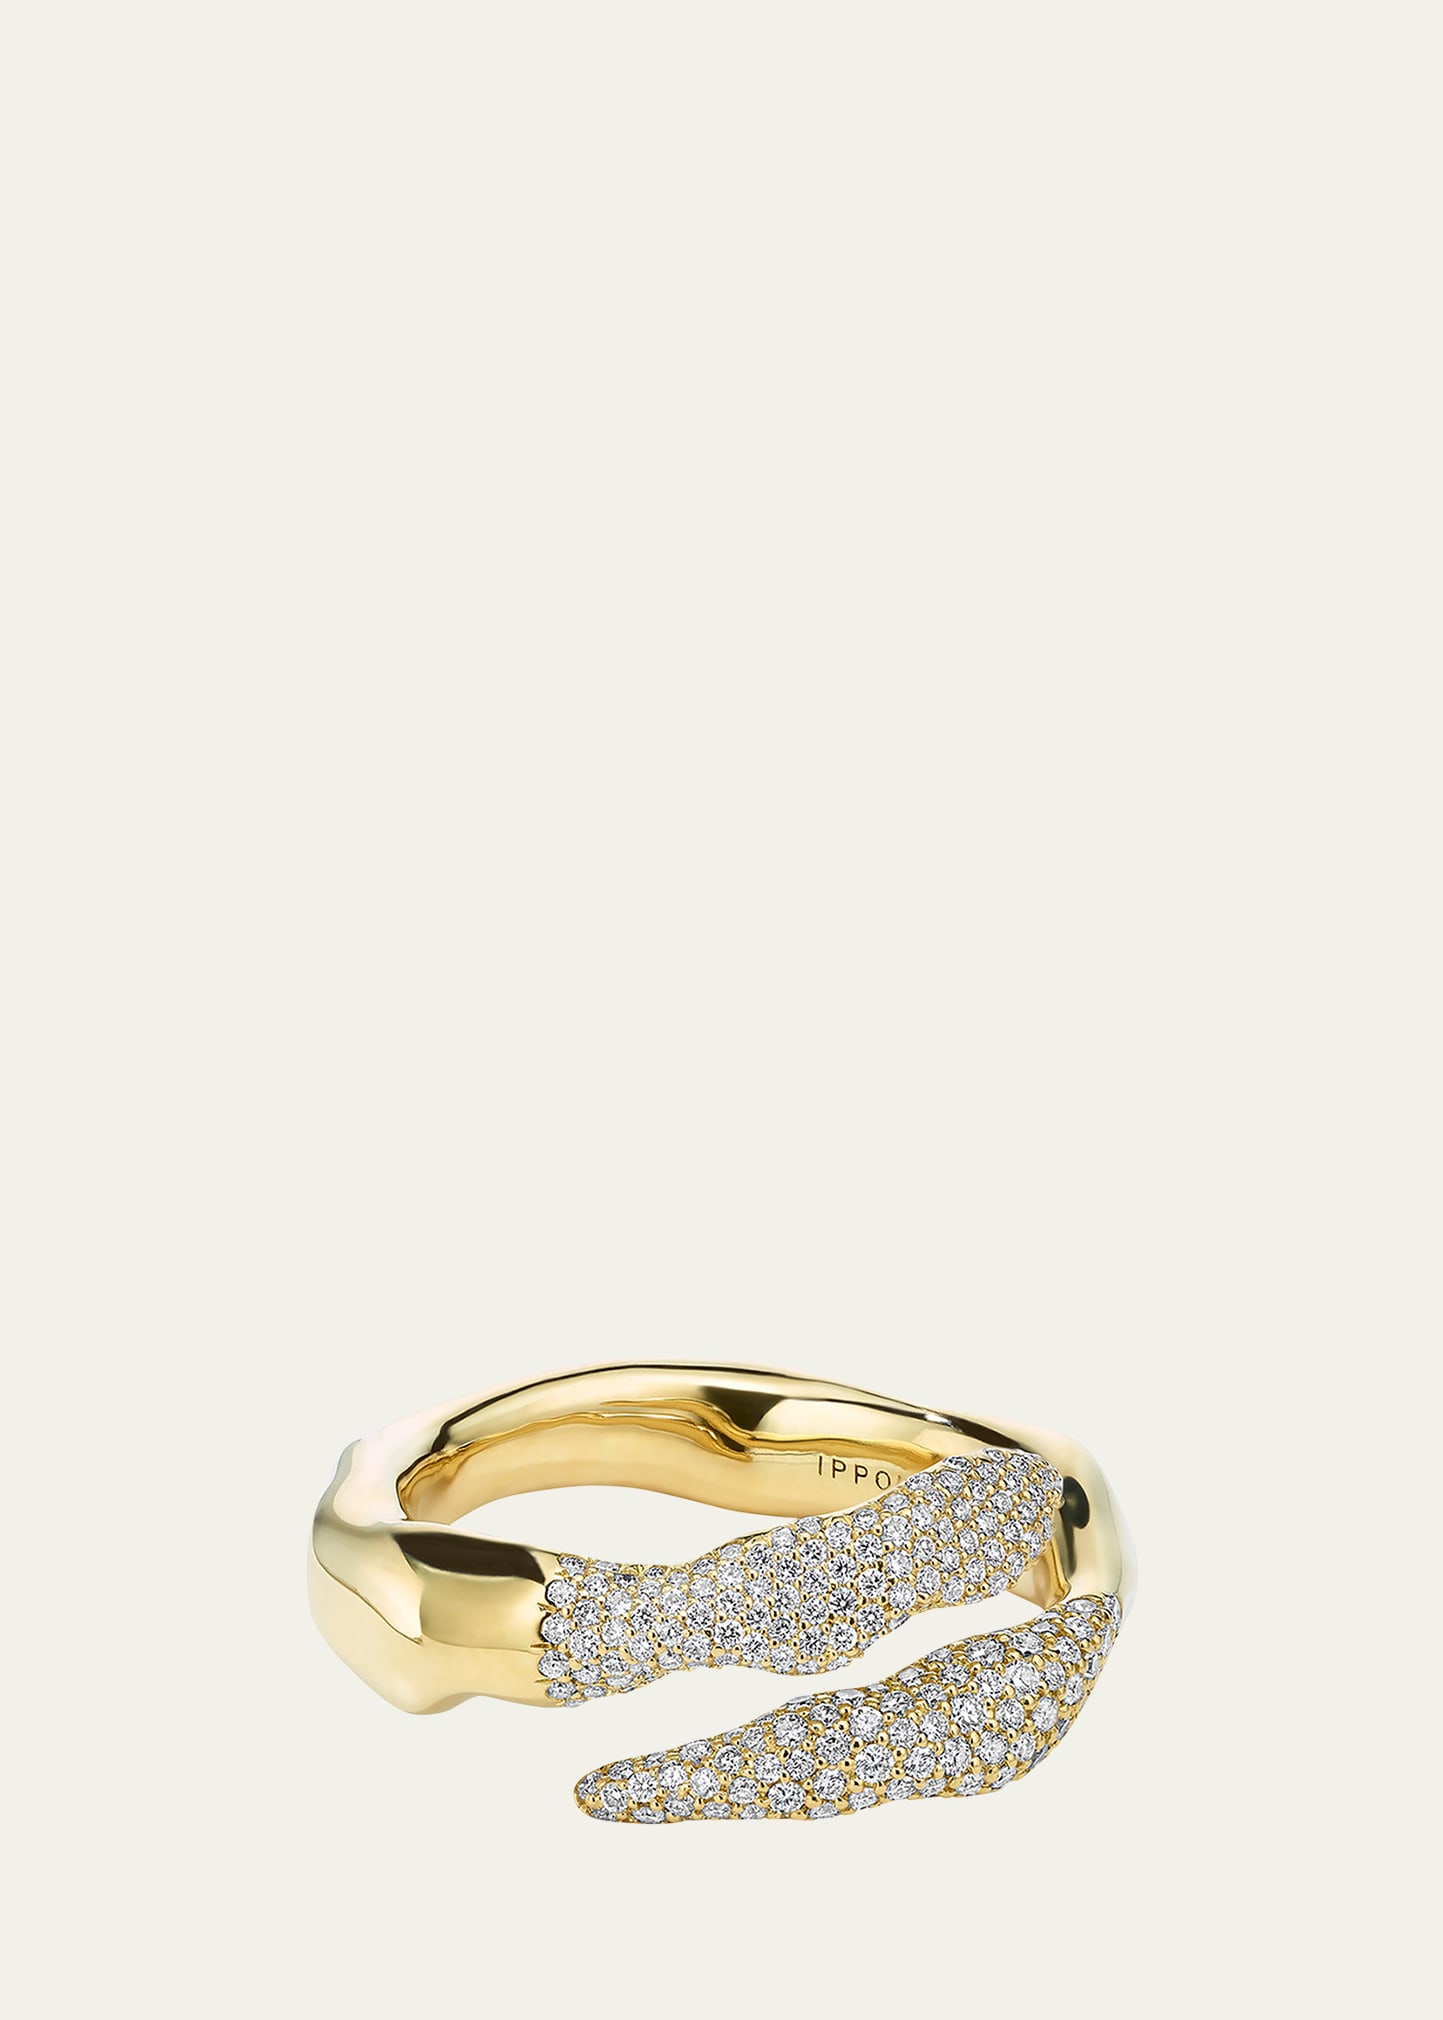 IPPOLITA SQUIGGLE BYPASS RING IN 18K WITH DIAMONDS